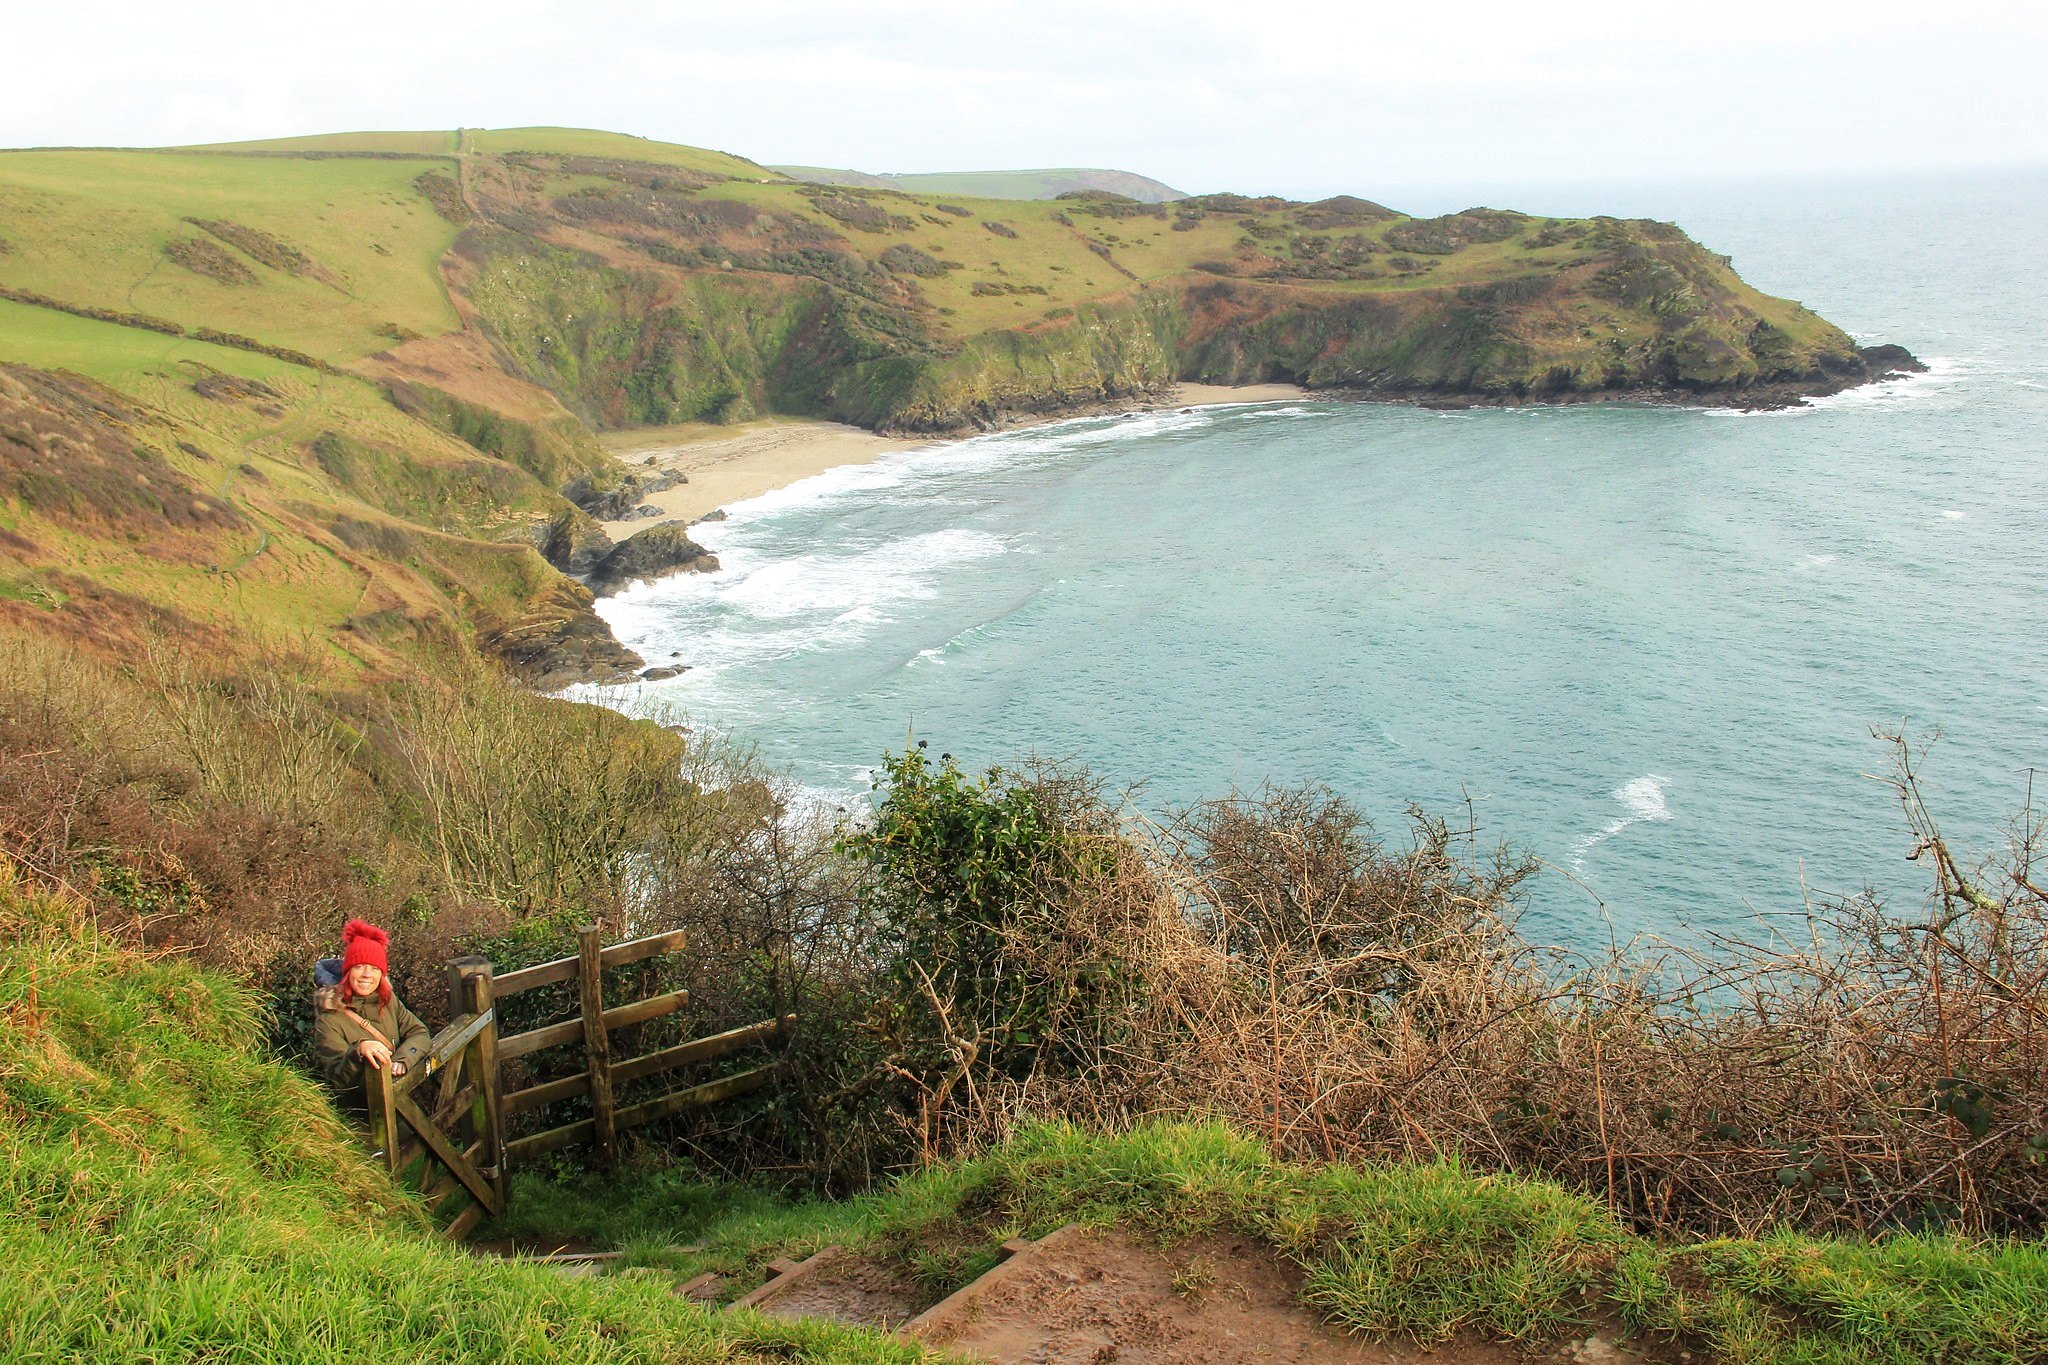 Me on South West Coast Path down to Lantic Bay, Cornwall